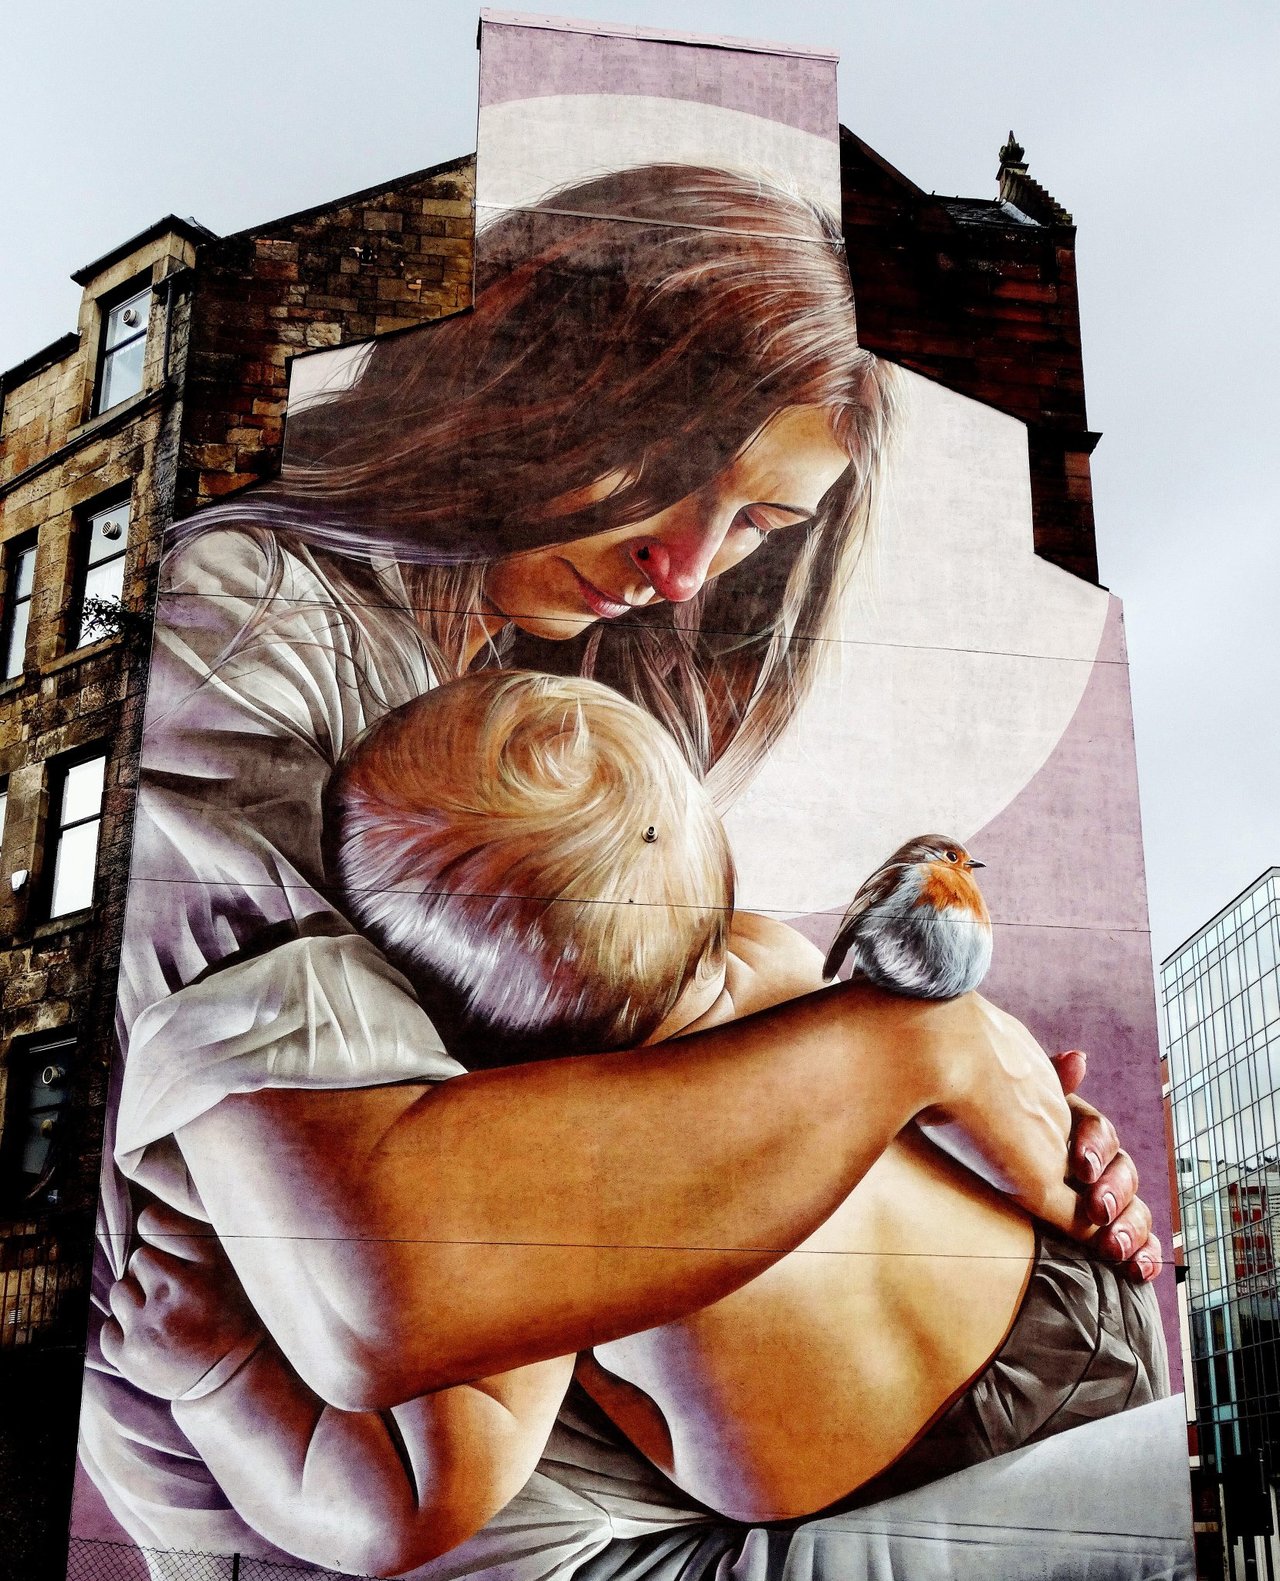 Meet the latest addition to Glasgow's public mural trail - graffiti artist Smug’s fresh take on the city’s founder St Mungo, with his mother St Enoch ‍ The robin is part of the city’s crest, and features in one of Mungo’s miracles ✨#ScotlandIsNow #StreetArt #Graffiti https://t.co/rCnDwx0lj8